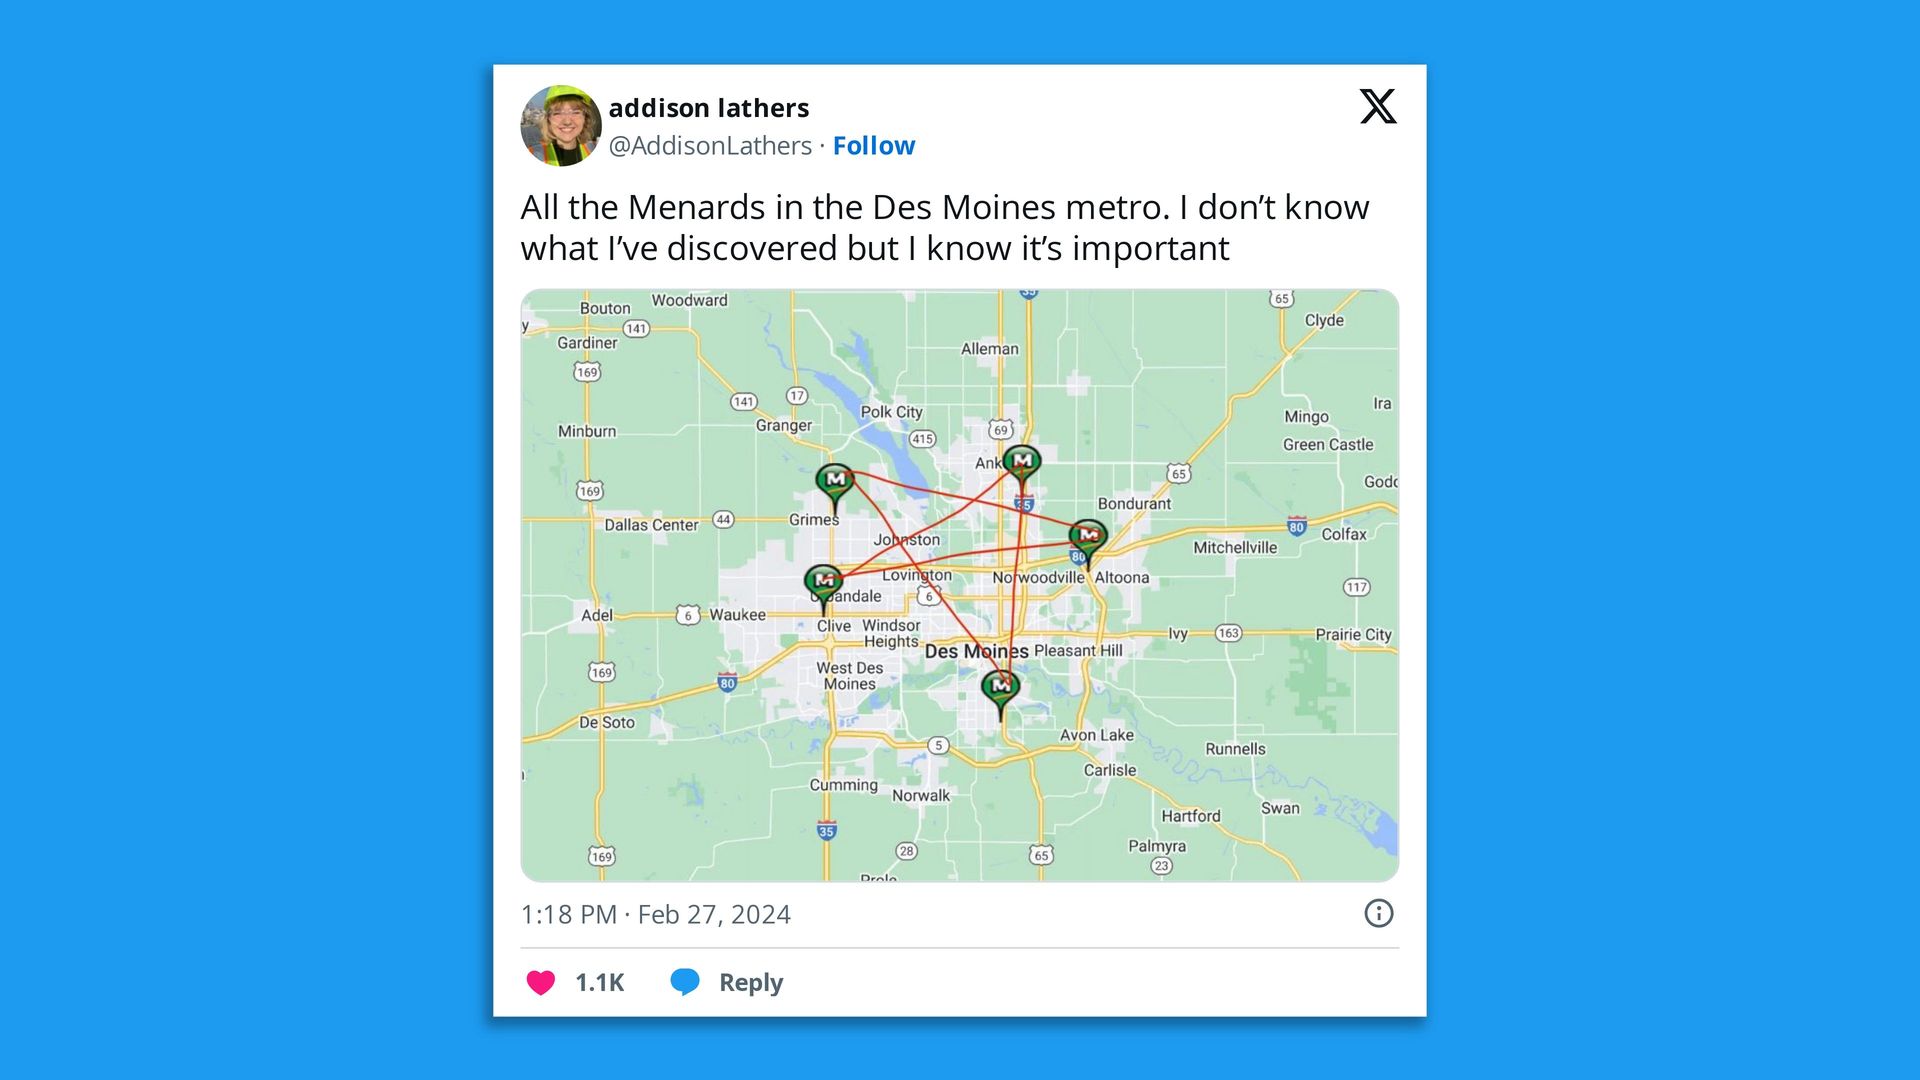 A tweet showing a drawn pentagram and all the Menards locations